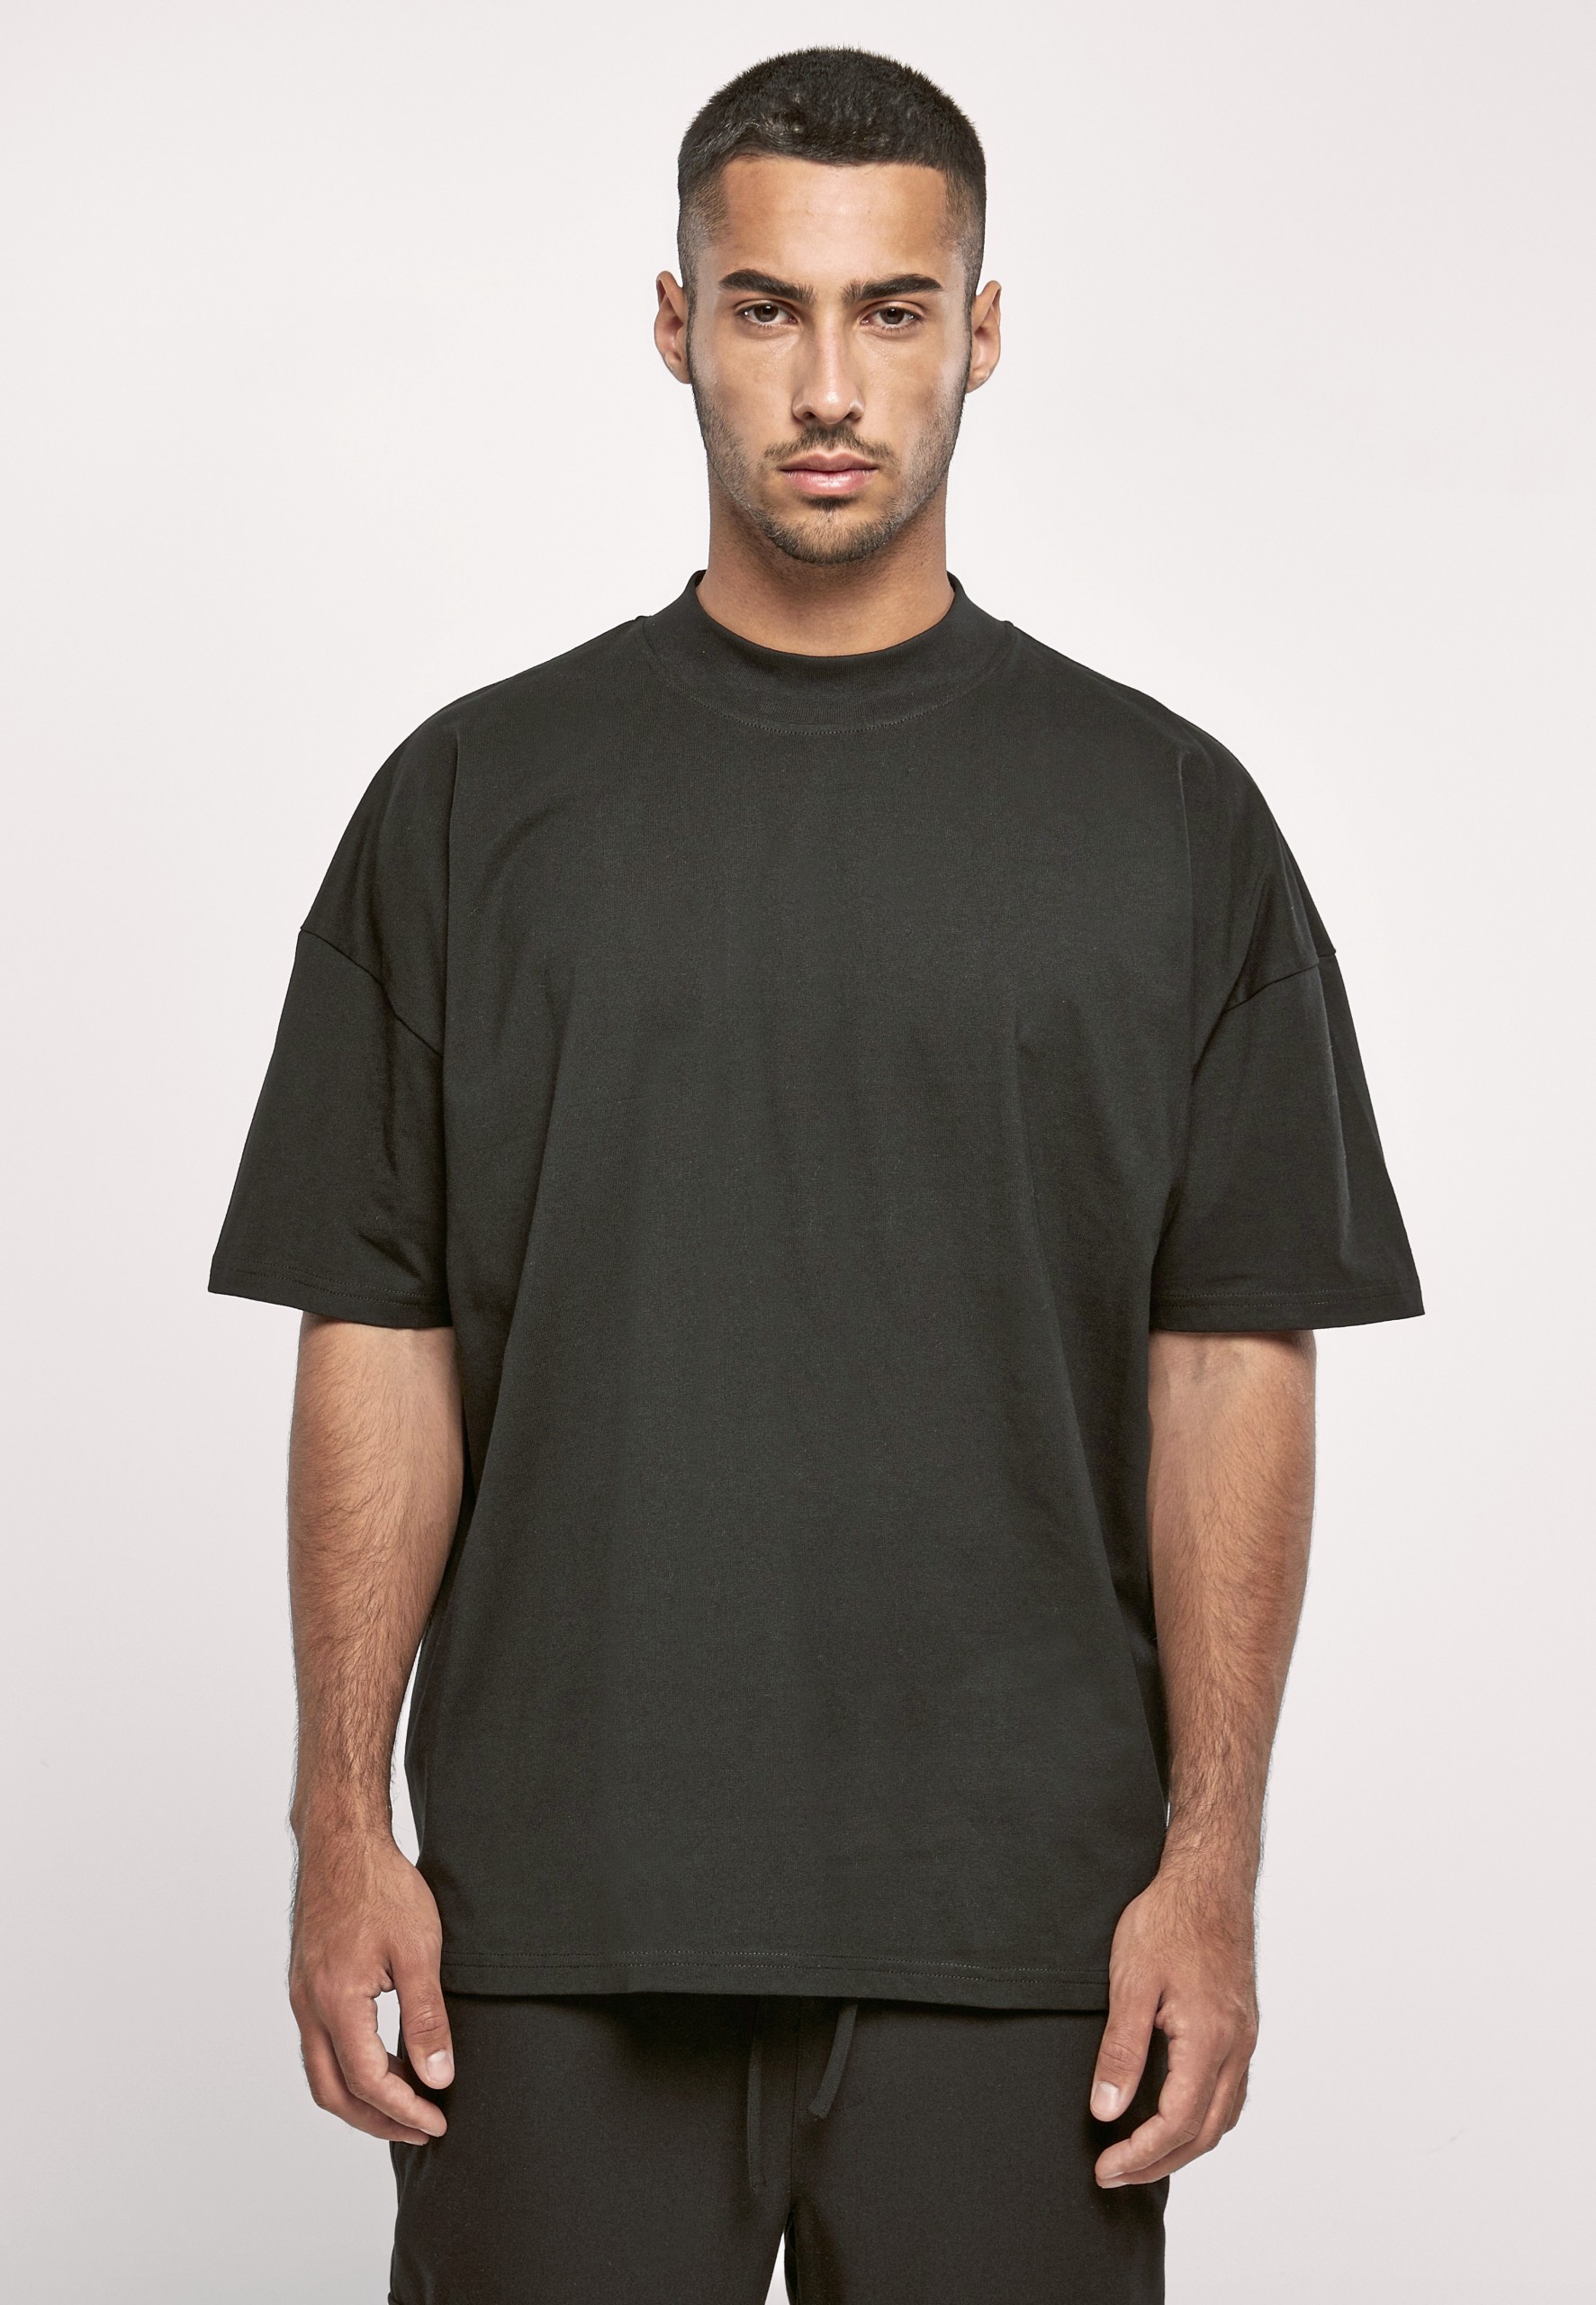 T-Shirts - Build Your Brand - Men´s Oversized Mock Neck Tee - BY230